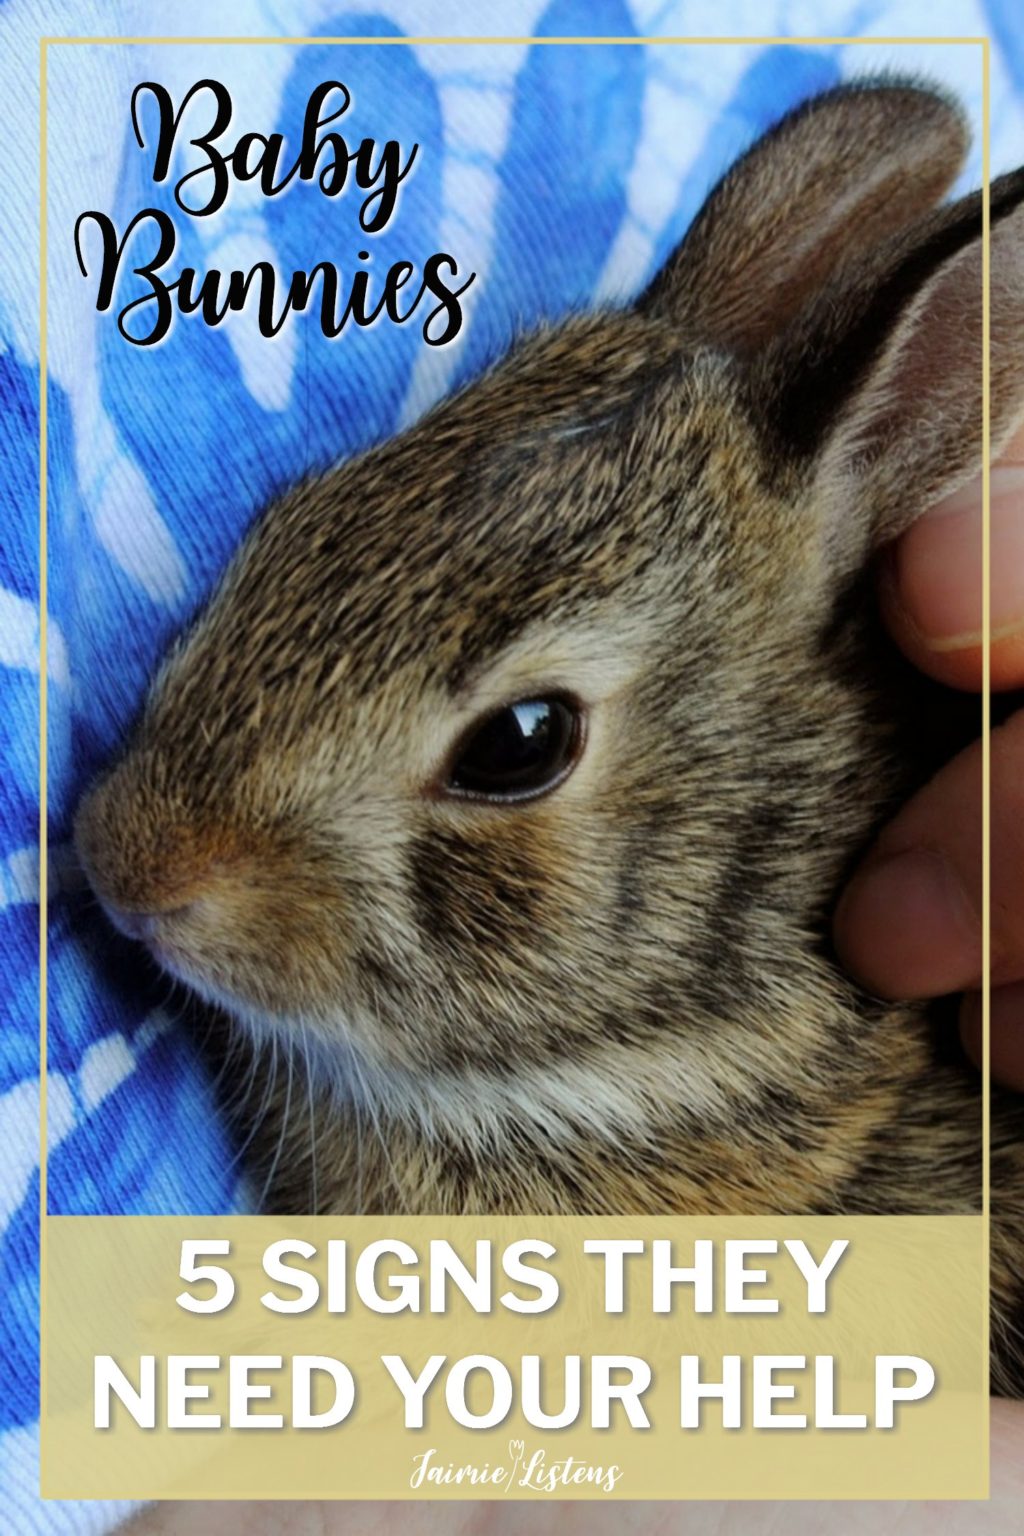 What Do I Need To Know About Baby Rabbit Health?